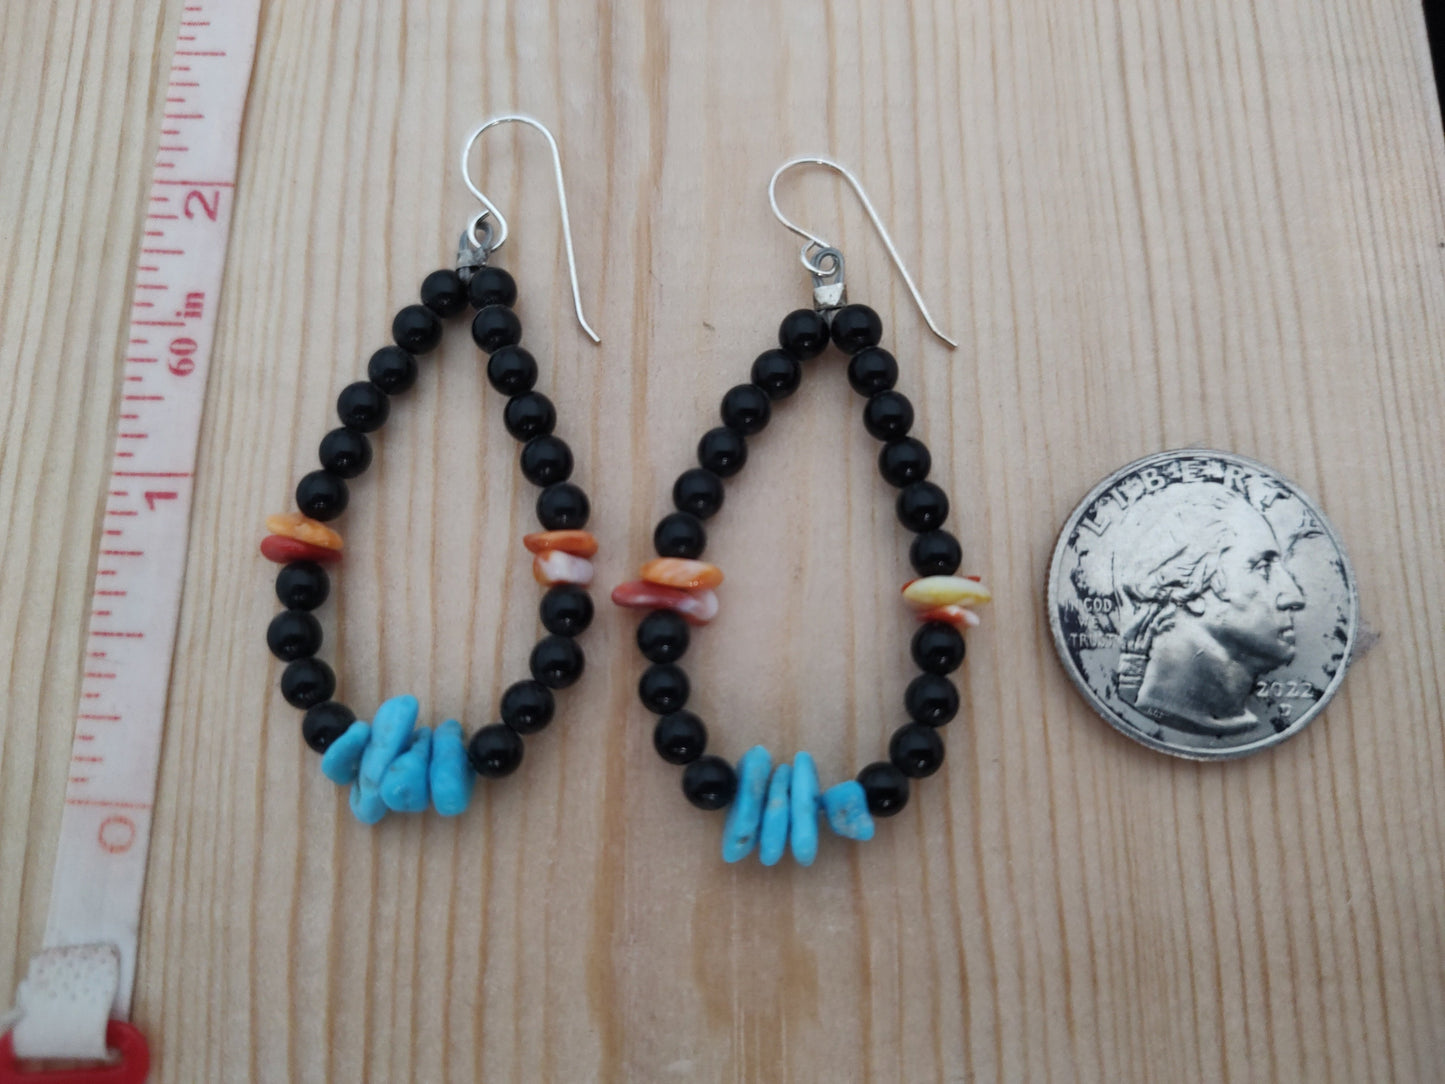 Spiny Oyster, Sleeping Beauty Turquoise, and Onyx Bead in Teardrop Shape with Hook Earrings